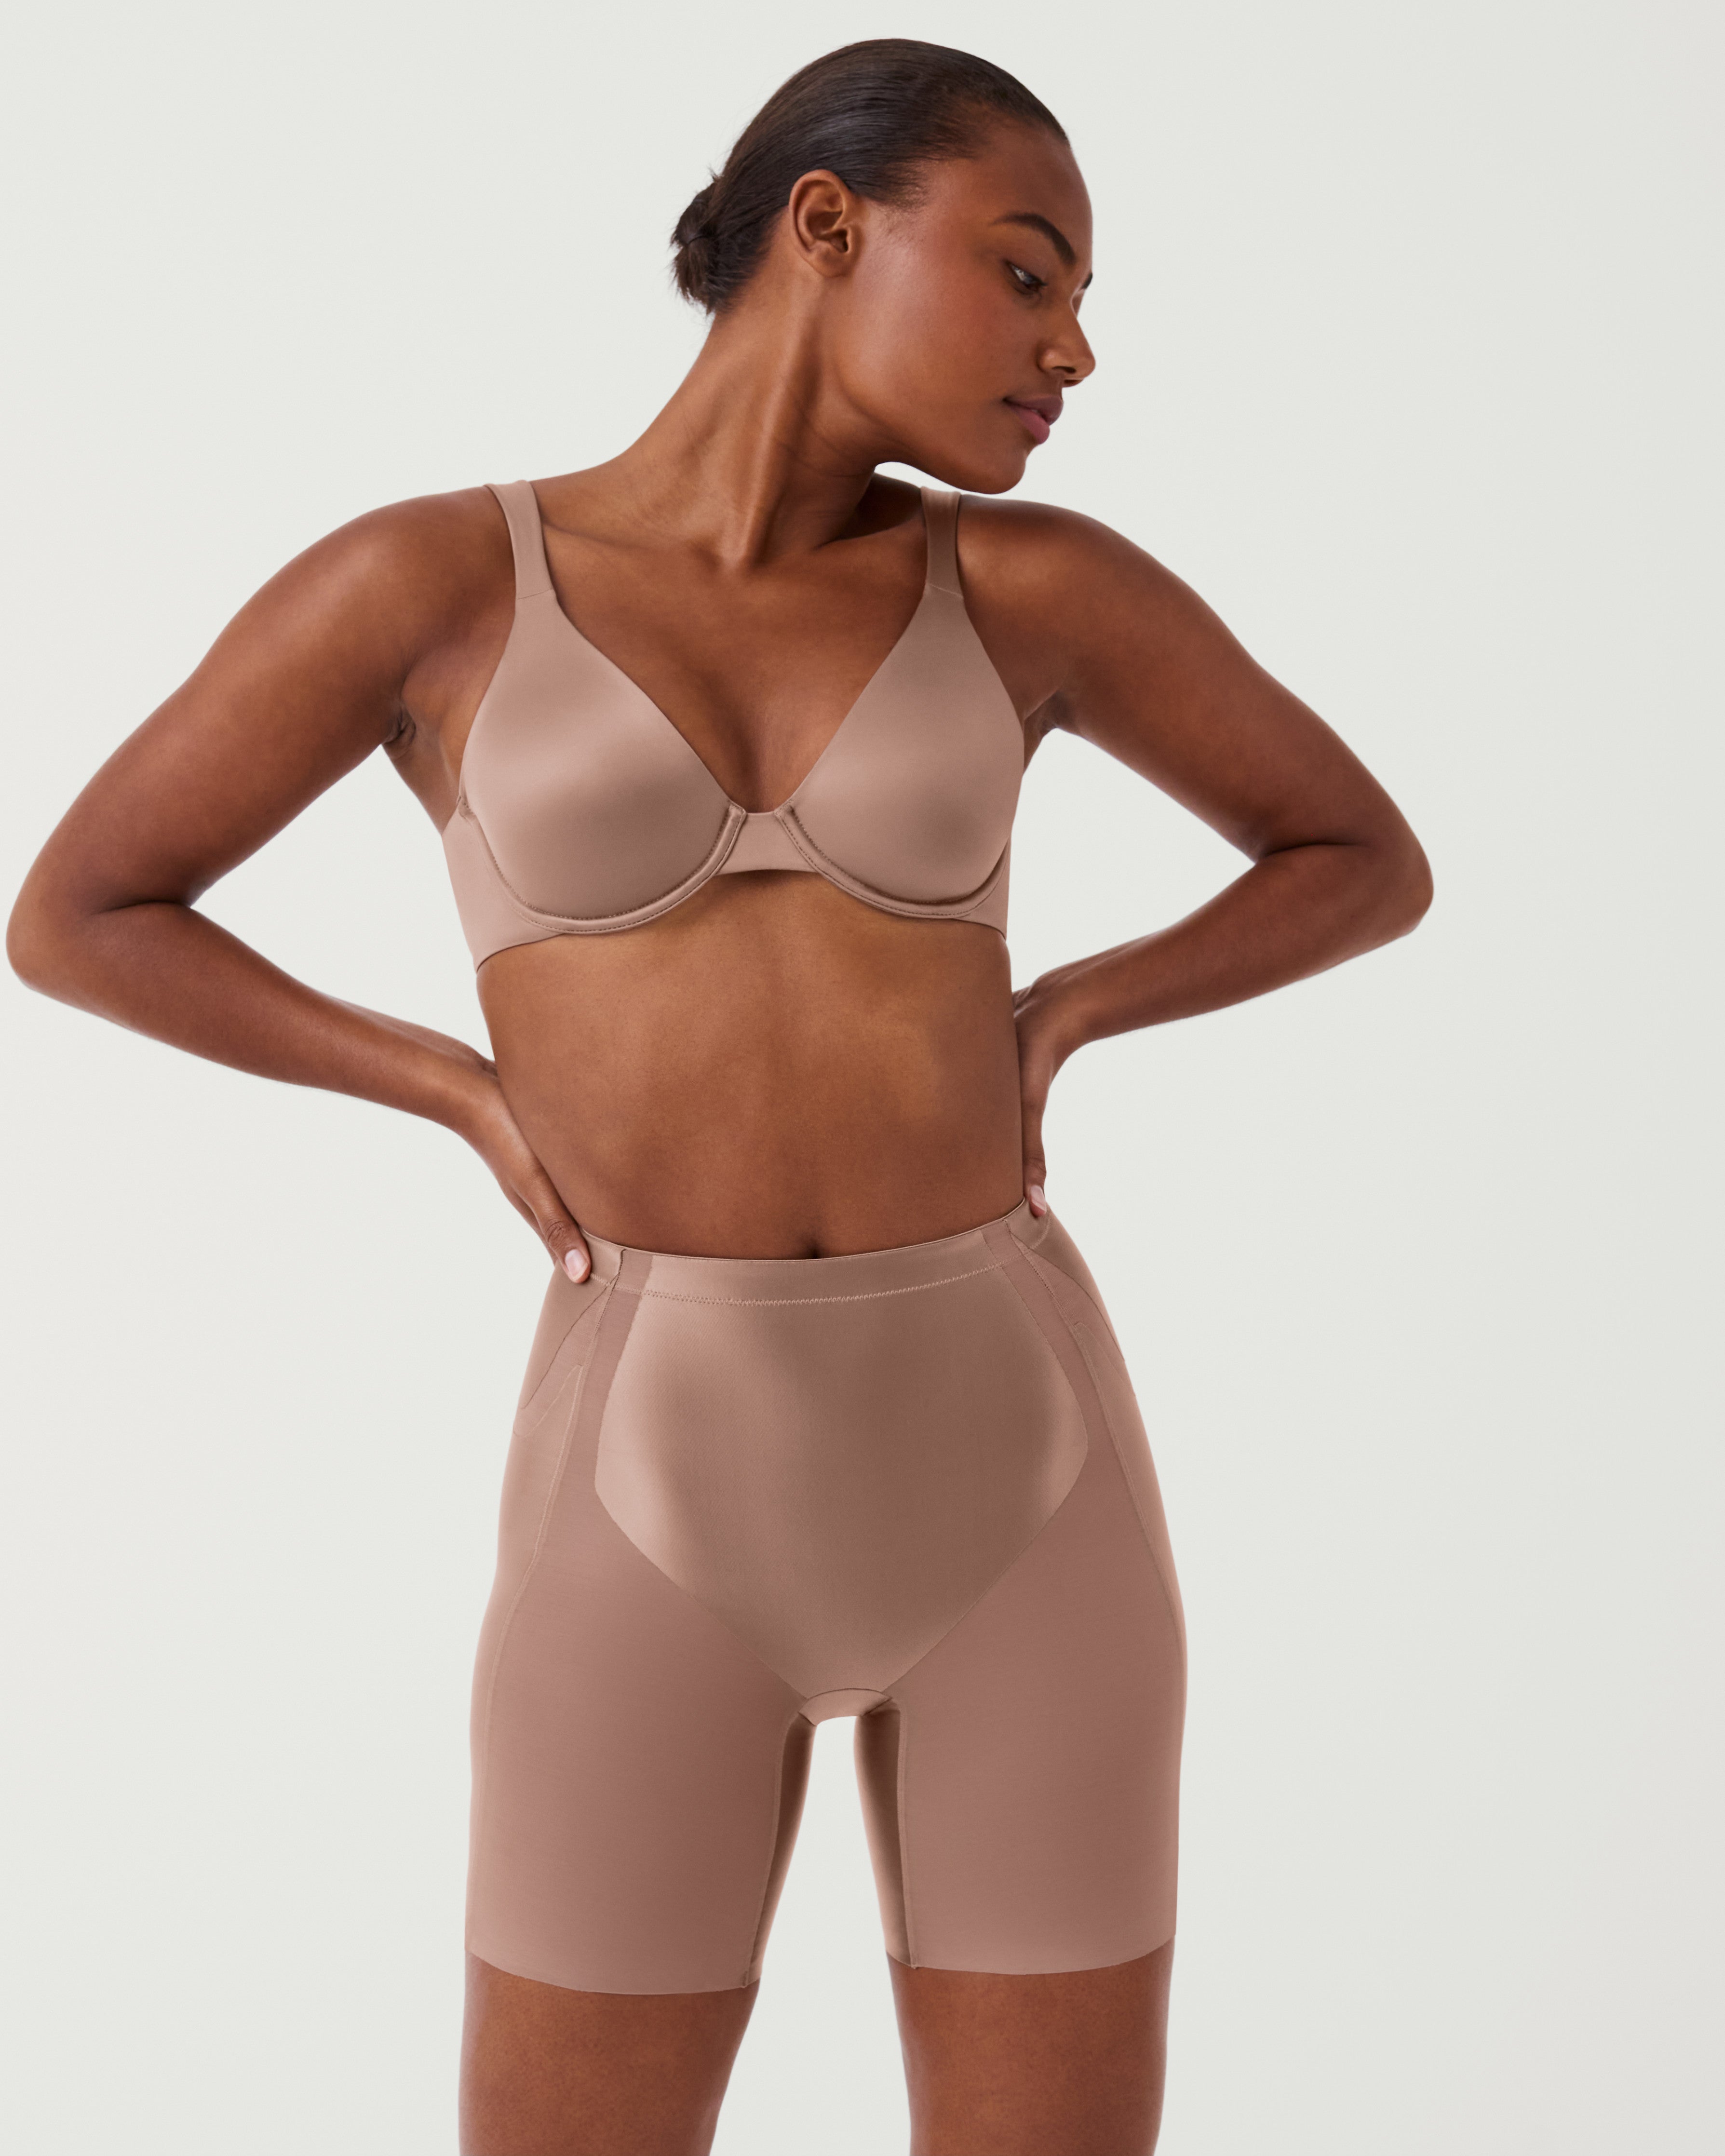 Booty-Lifting Shaping Brief – Spanx